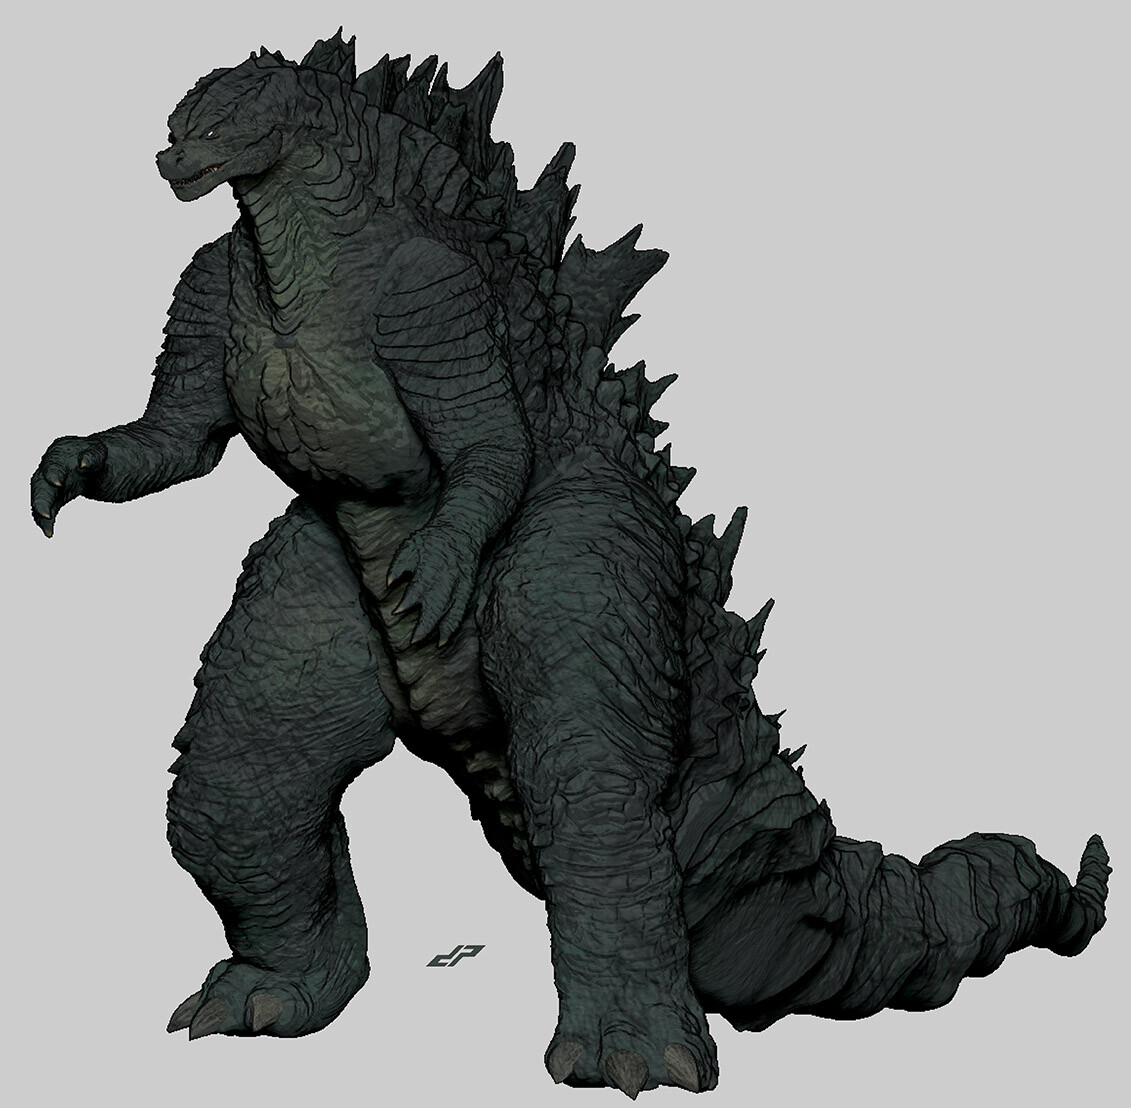 This Sketchfab 3D model has been deleted. zGODZILLA 2014. 